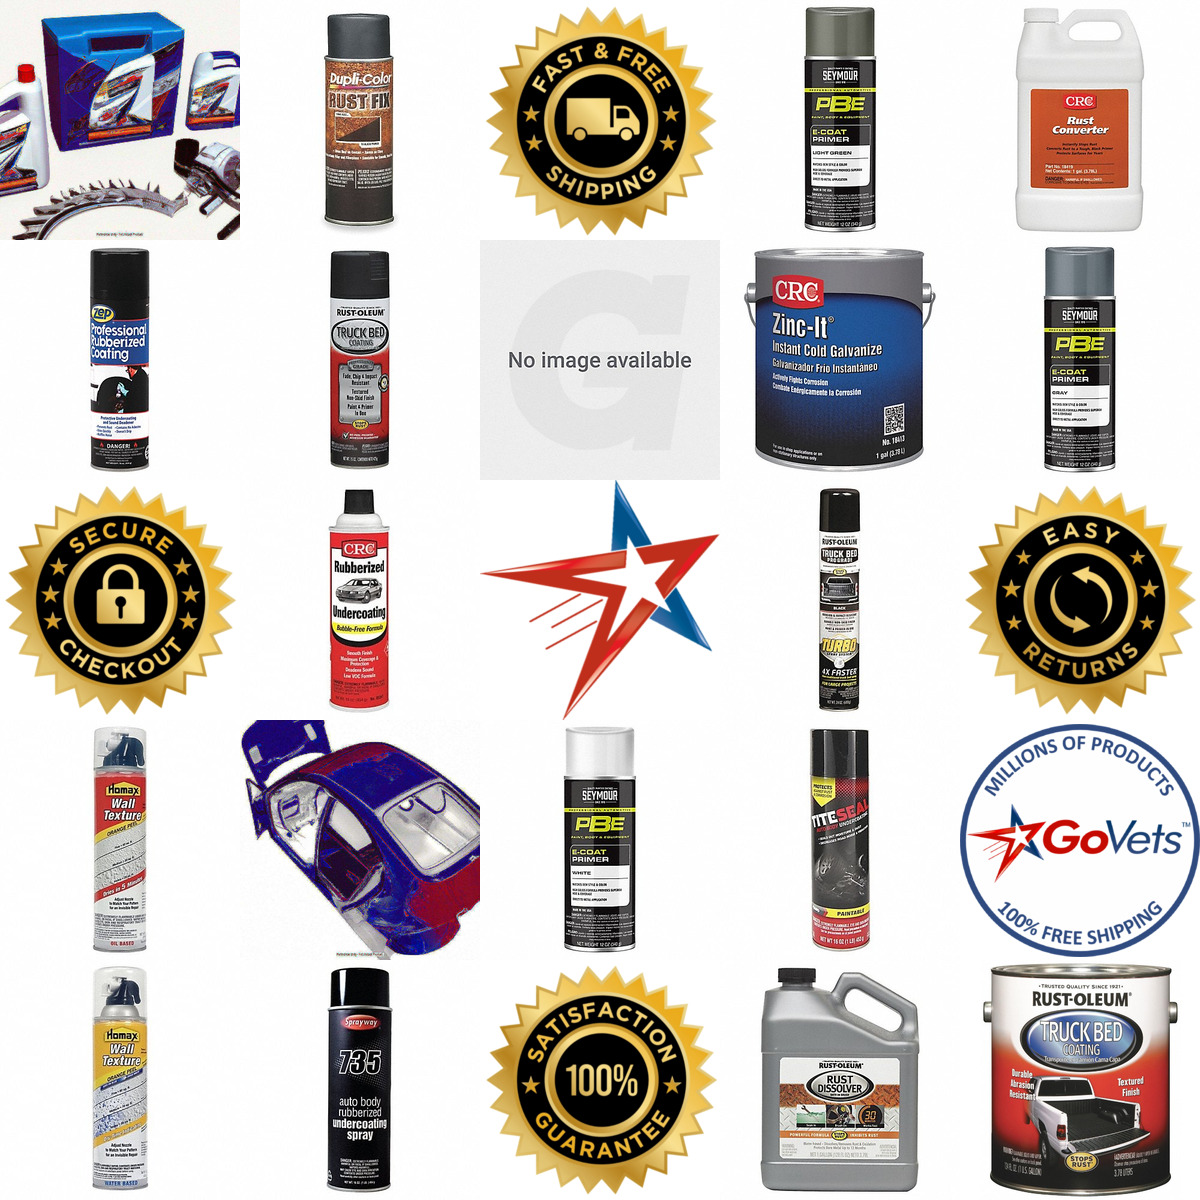 A selection of Automotive Paints and Coatings products on GoVets